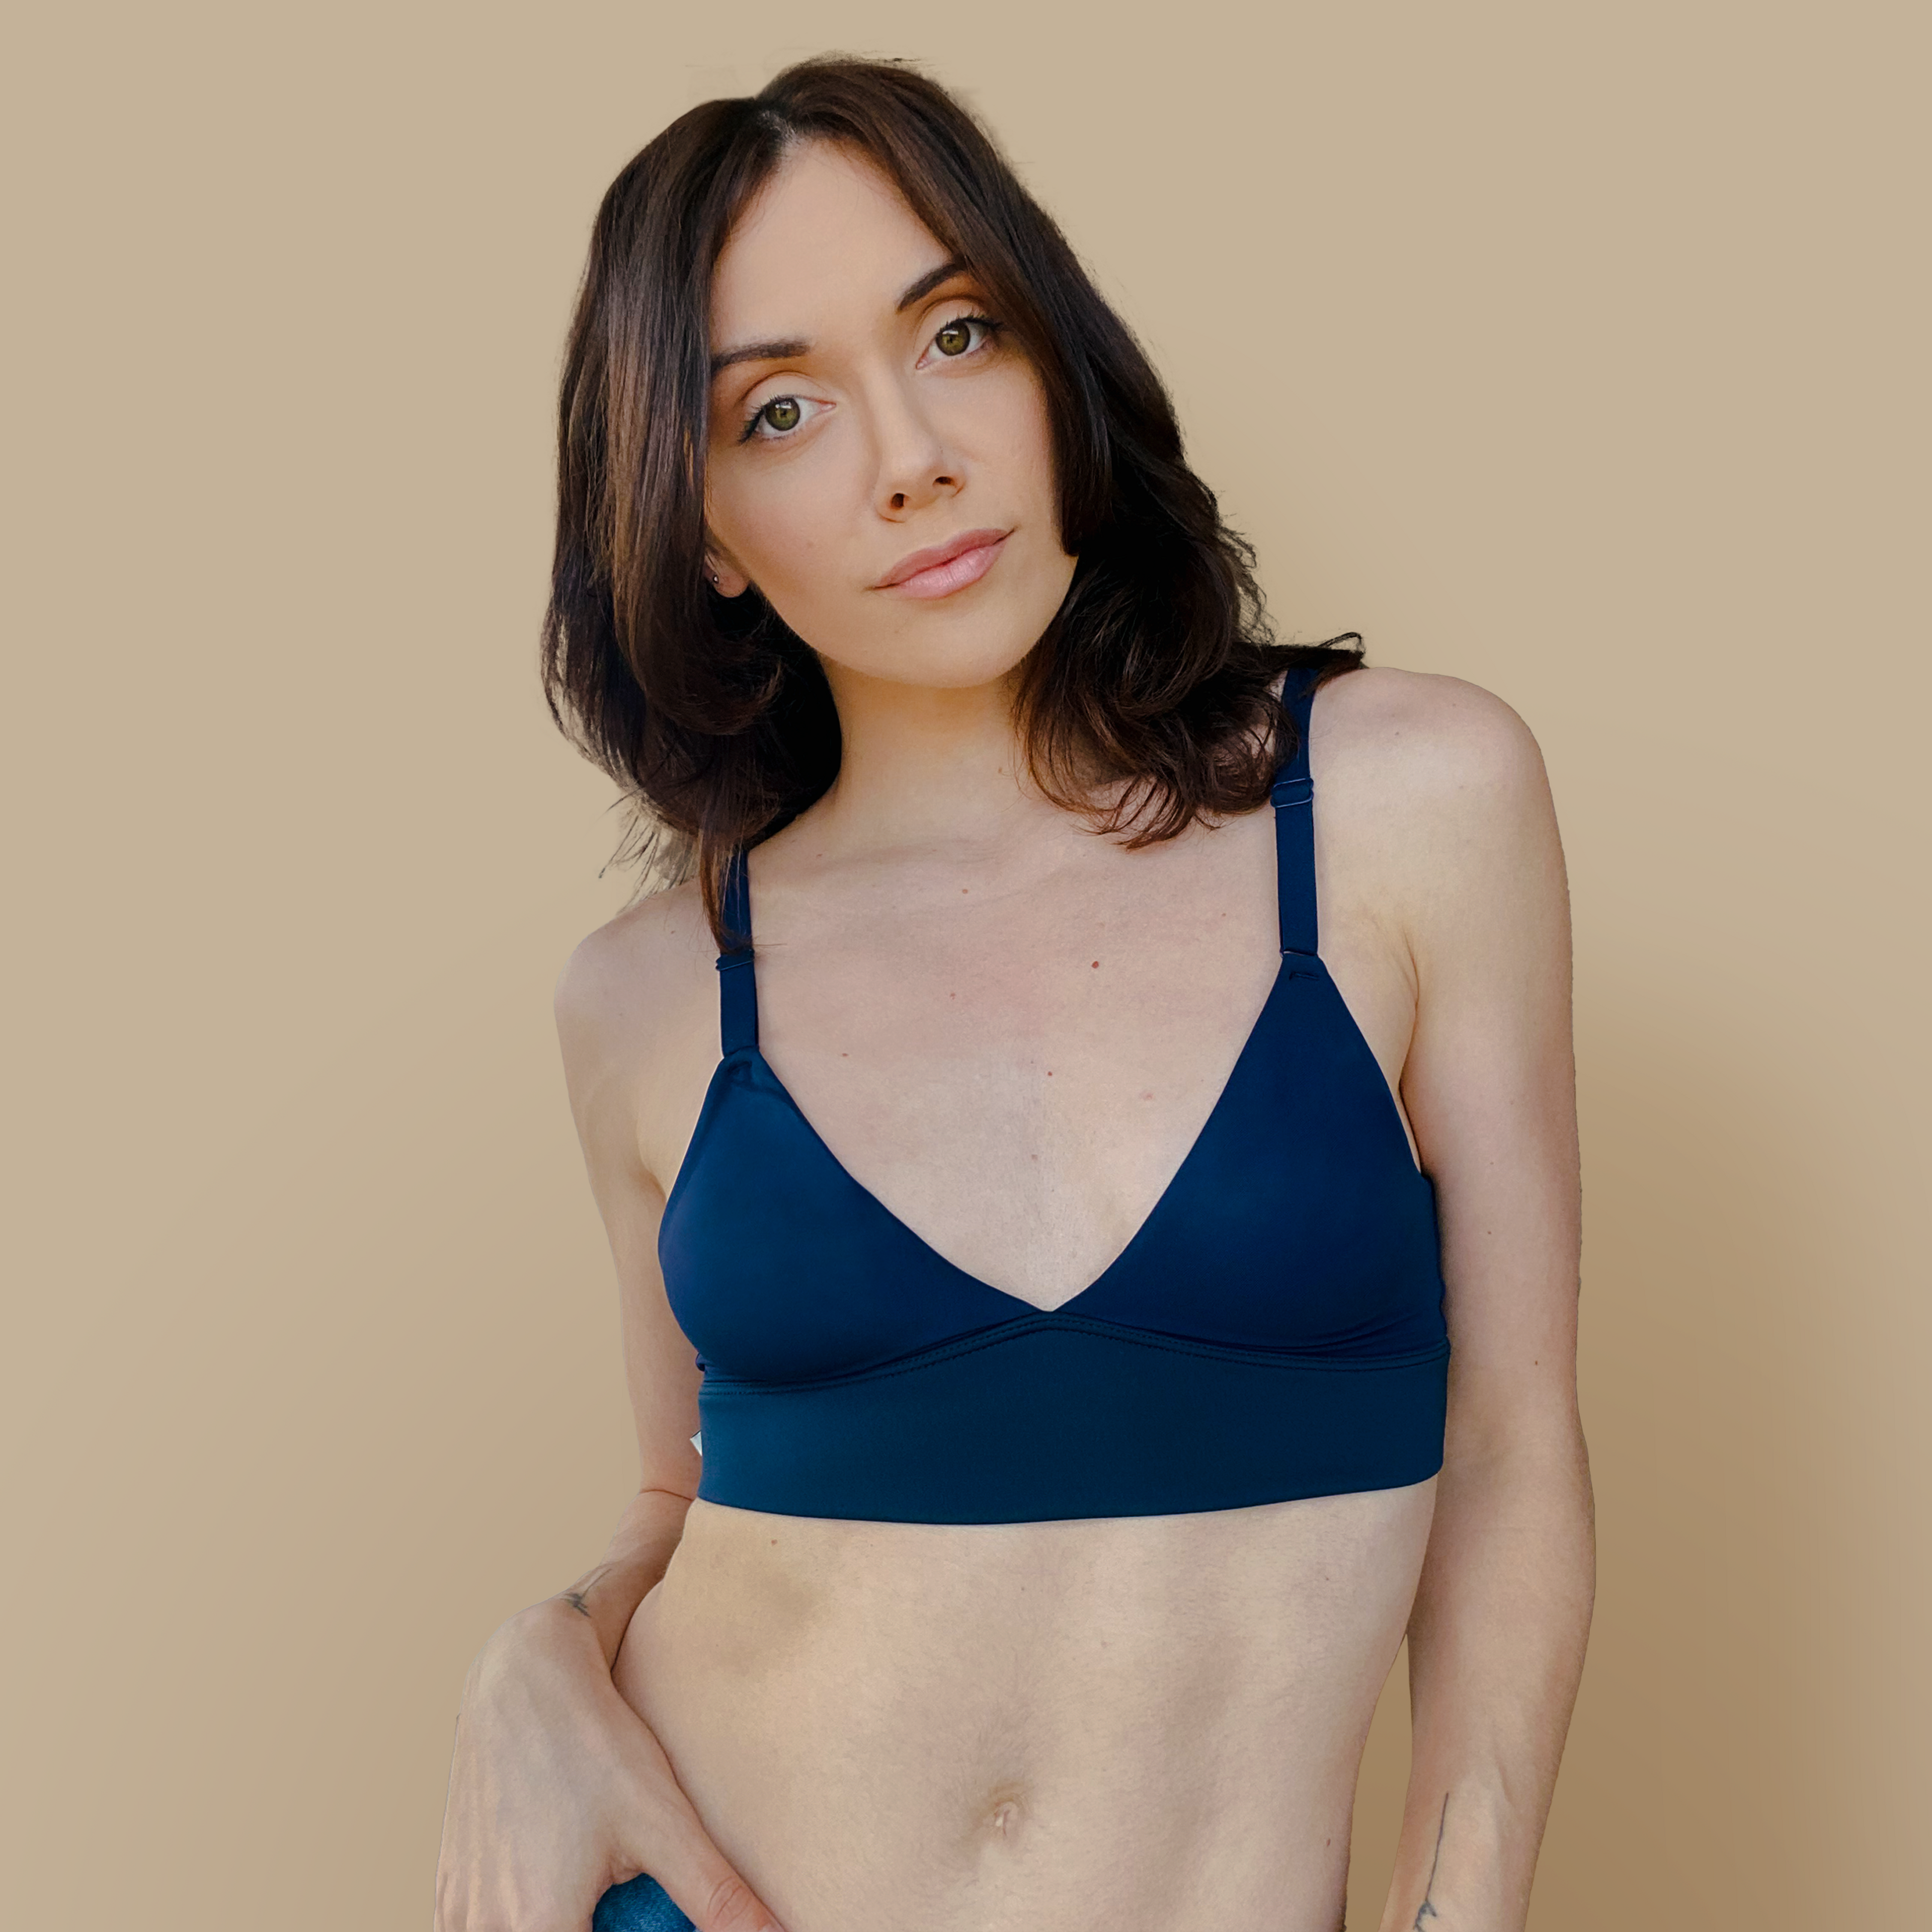 The Stretch Rib Scoop Bralette is a modern classic and the